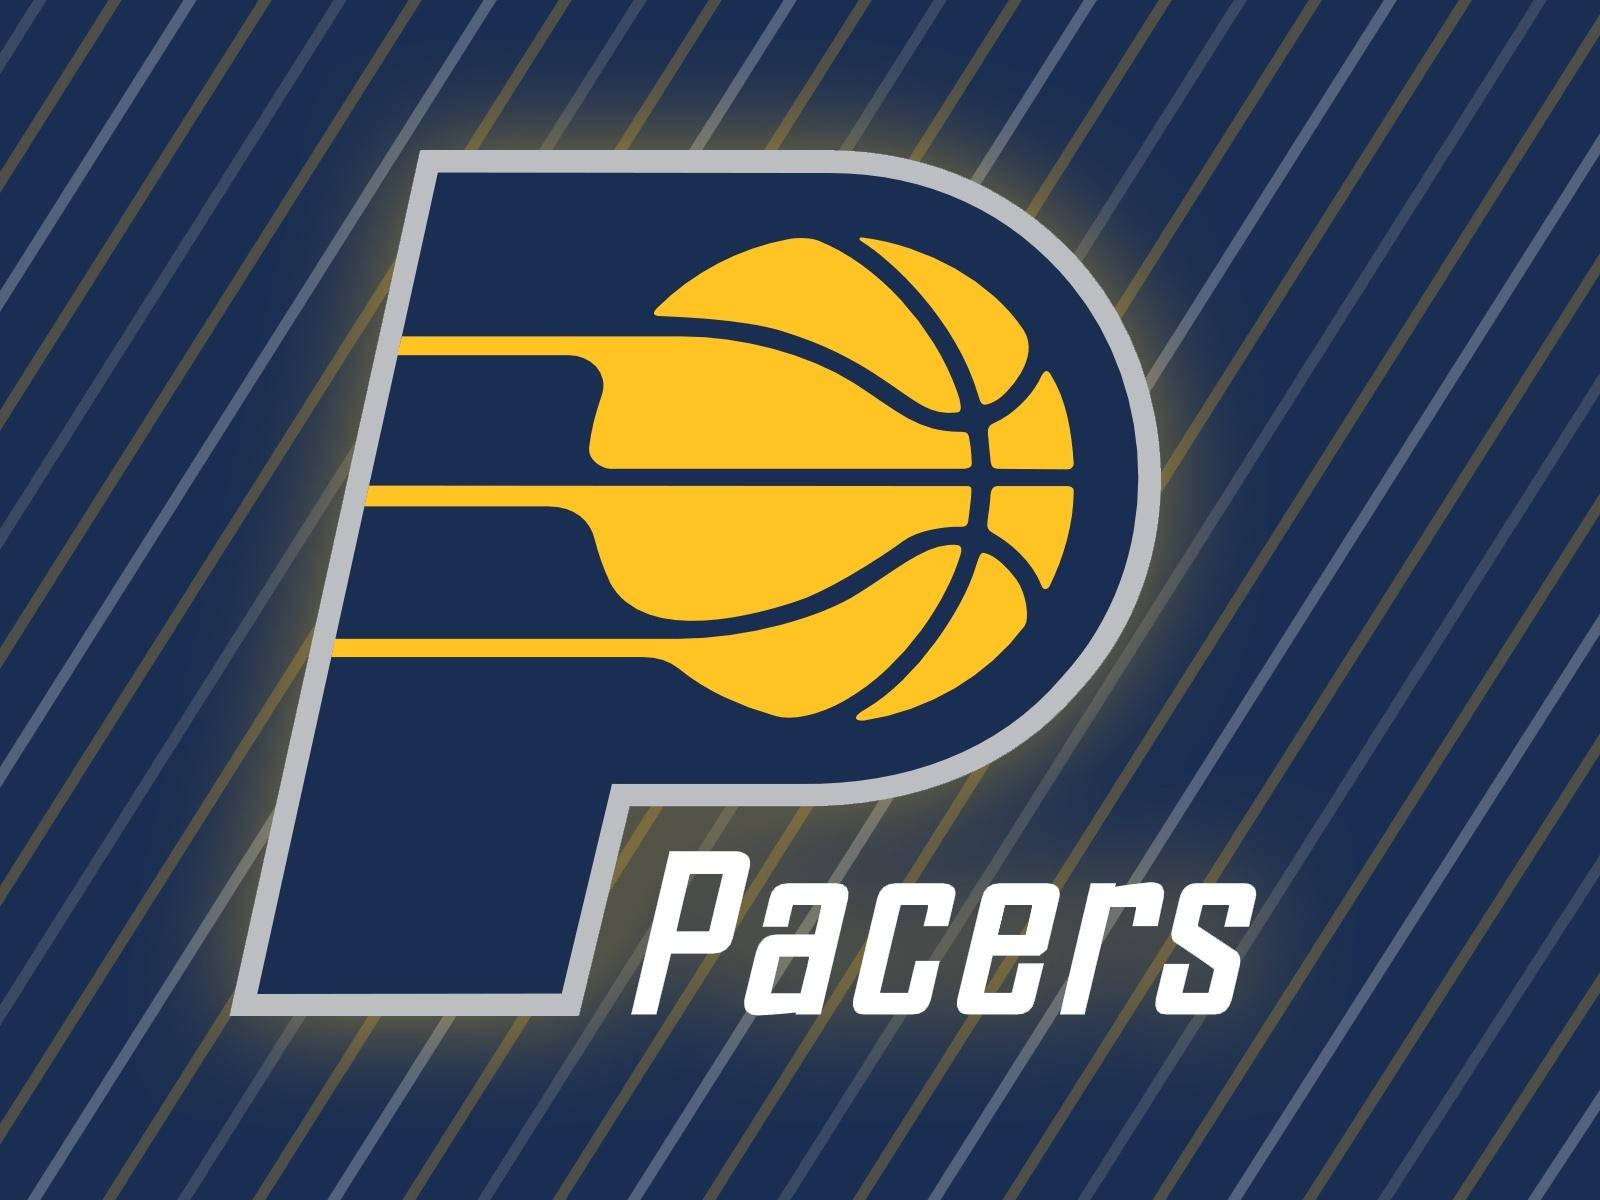 Indiana Pacers Diagonal Lines Background Wallpaper